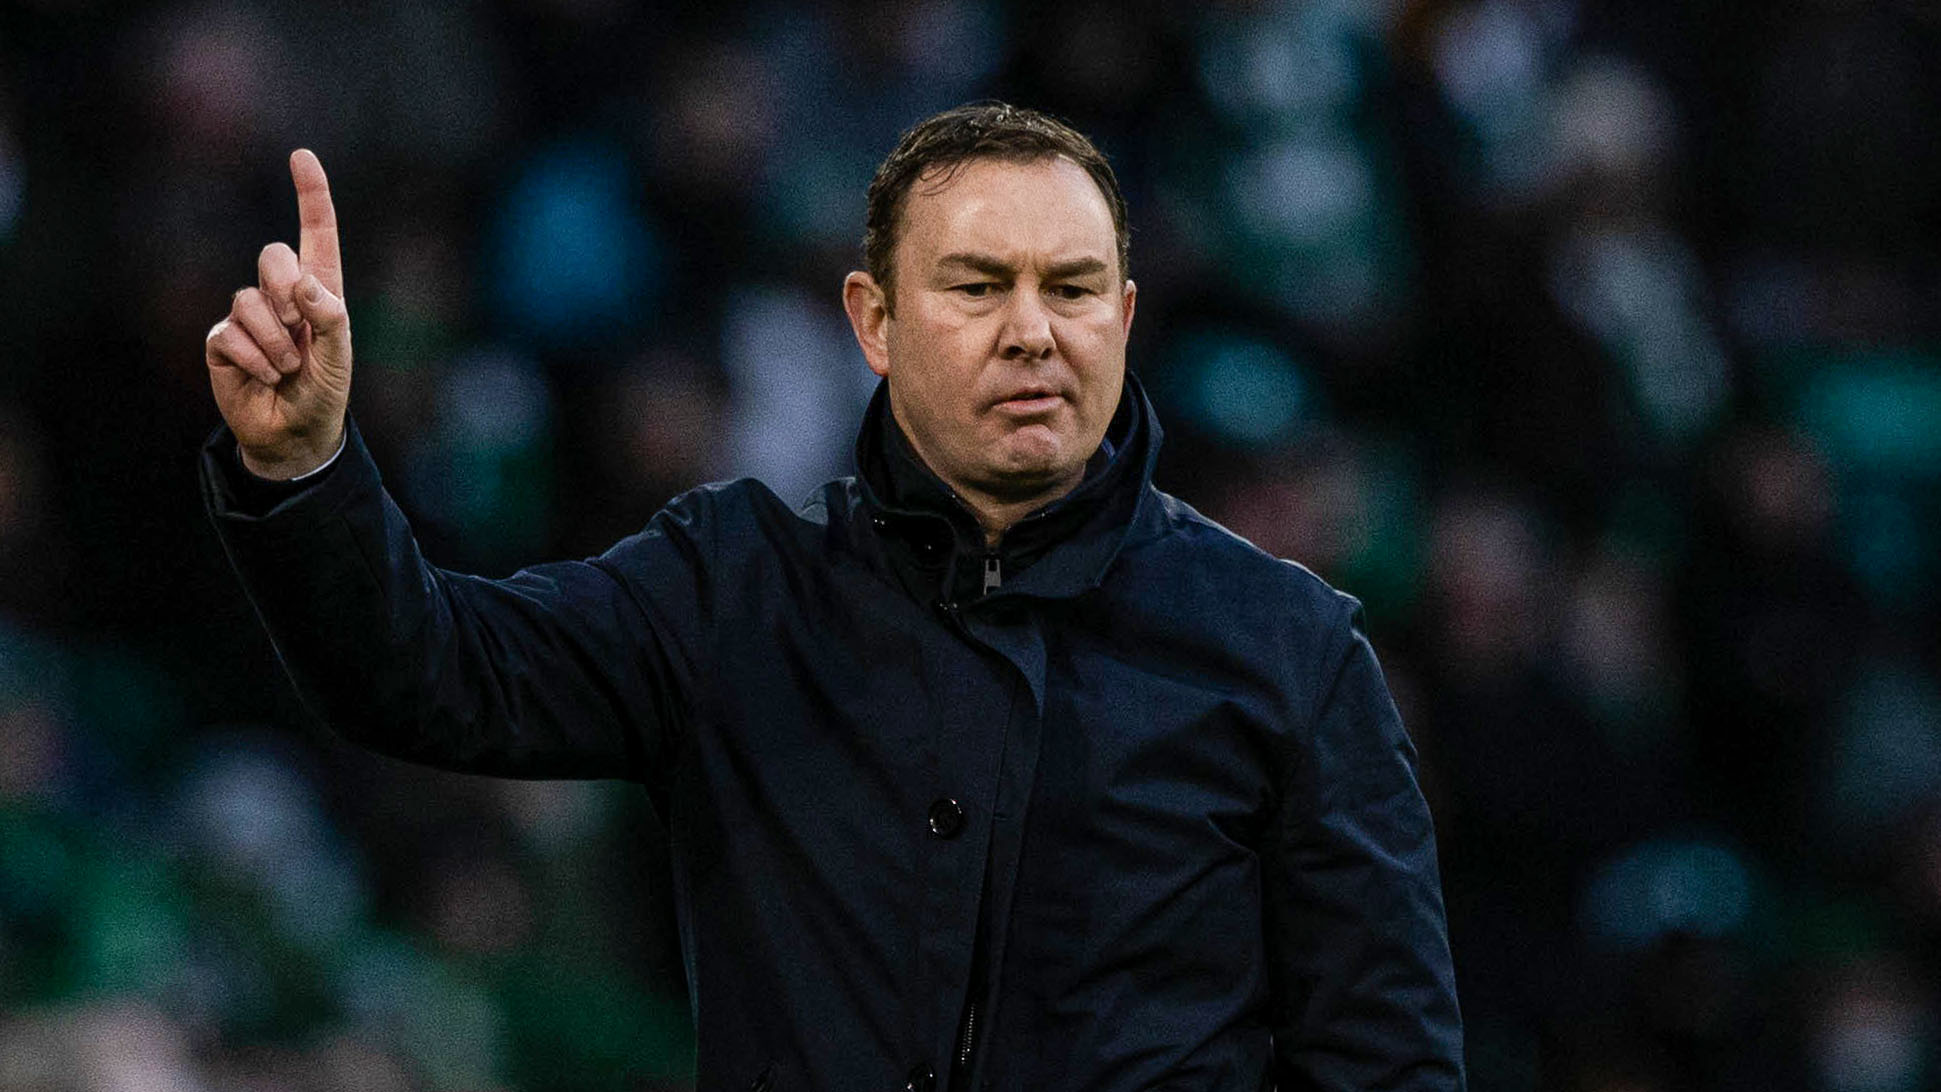 Derek Adams brought about unity in Scottish football family